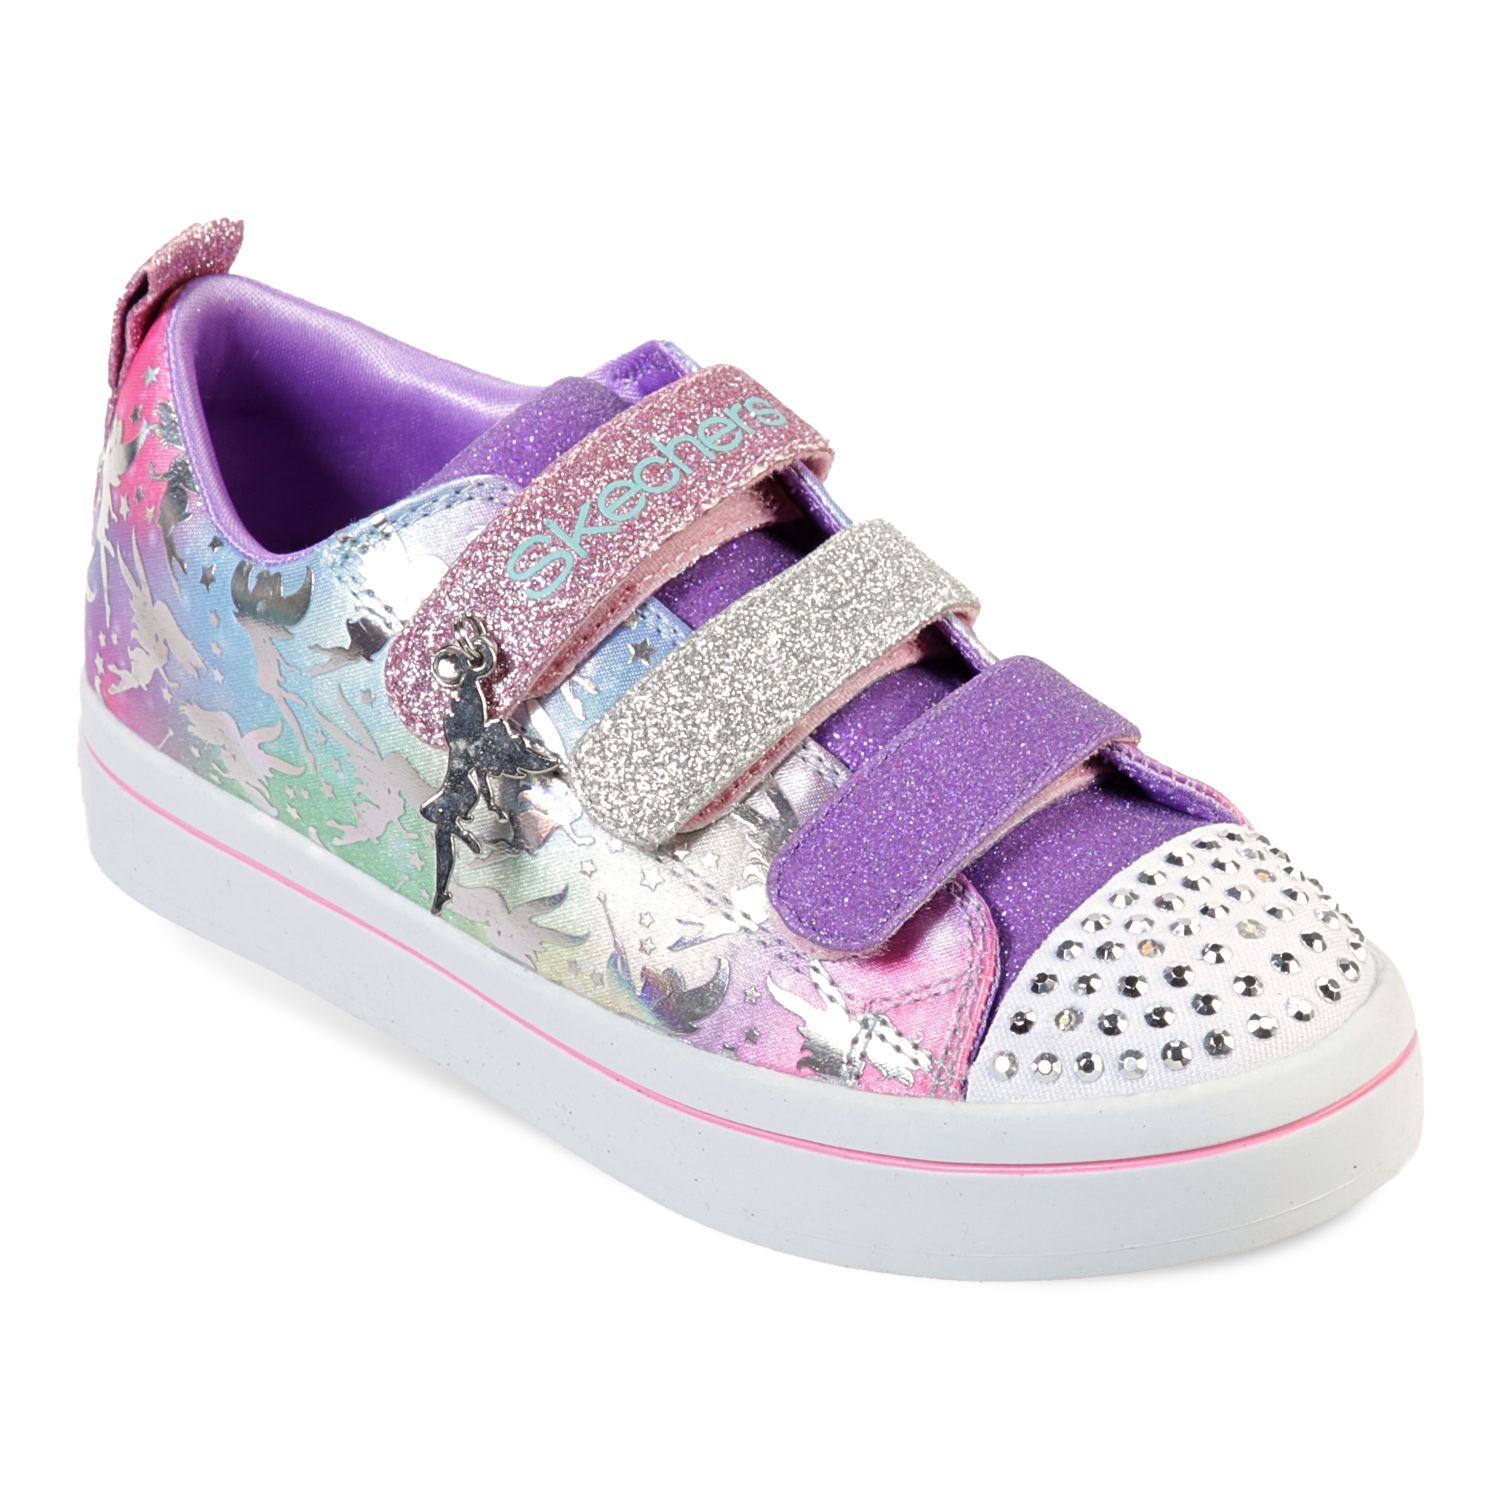 skechers twinkle toes light up shoes